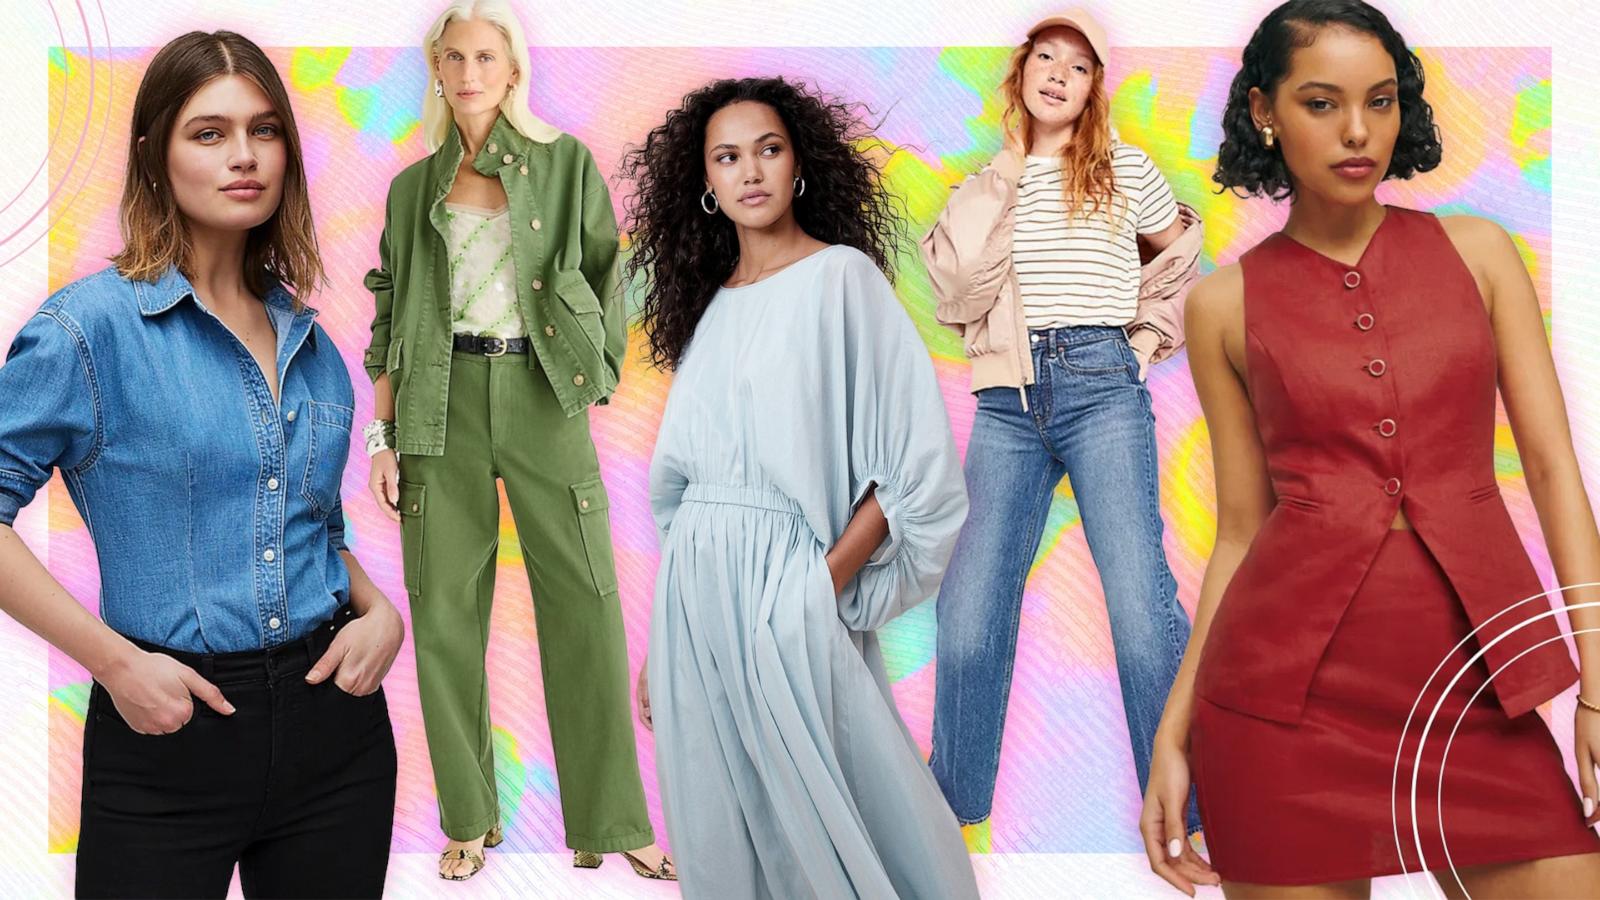 Spring new arrivals to shop right now: Shop dresses, sweaters, tops,  bottoms and accessories - Good Morning America